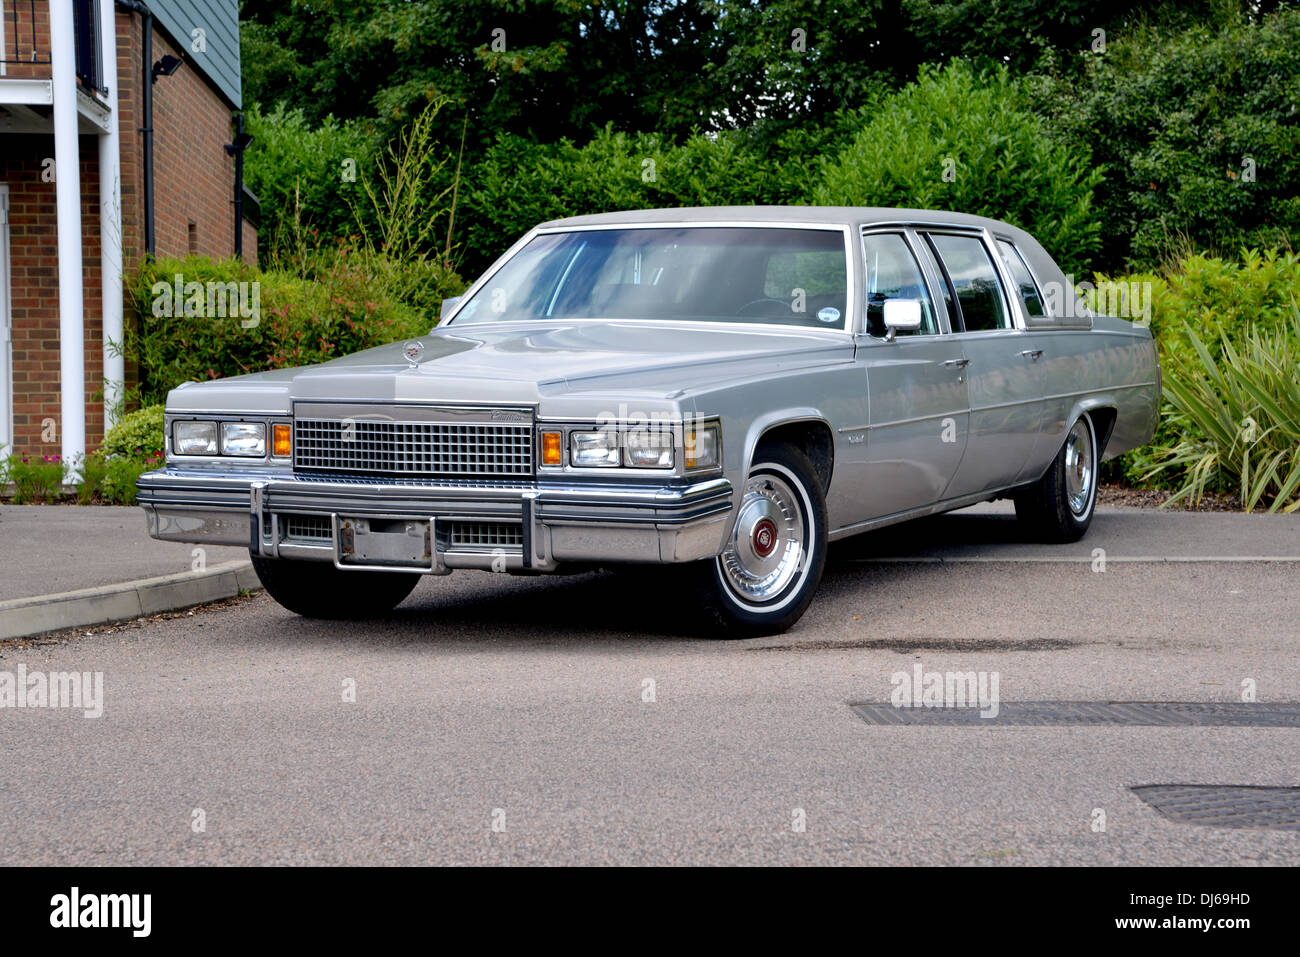 1979 Cadillac Series 75 stretch limo classic American car Stock Photo